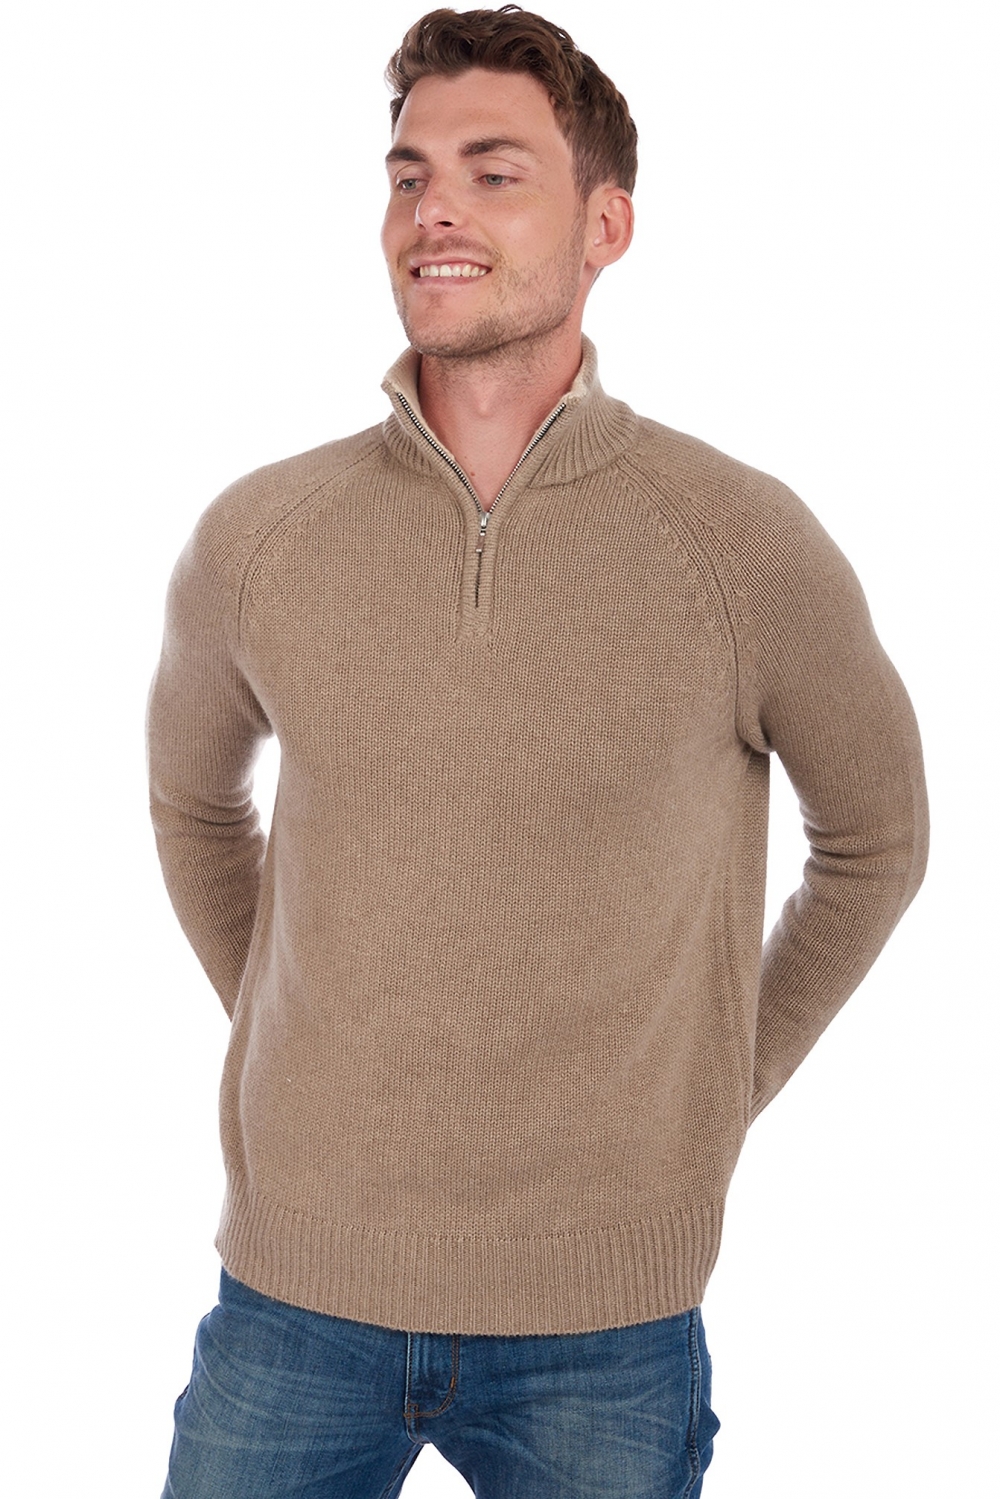 Cashmere men chunky sweater angers natural brown natural beige s